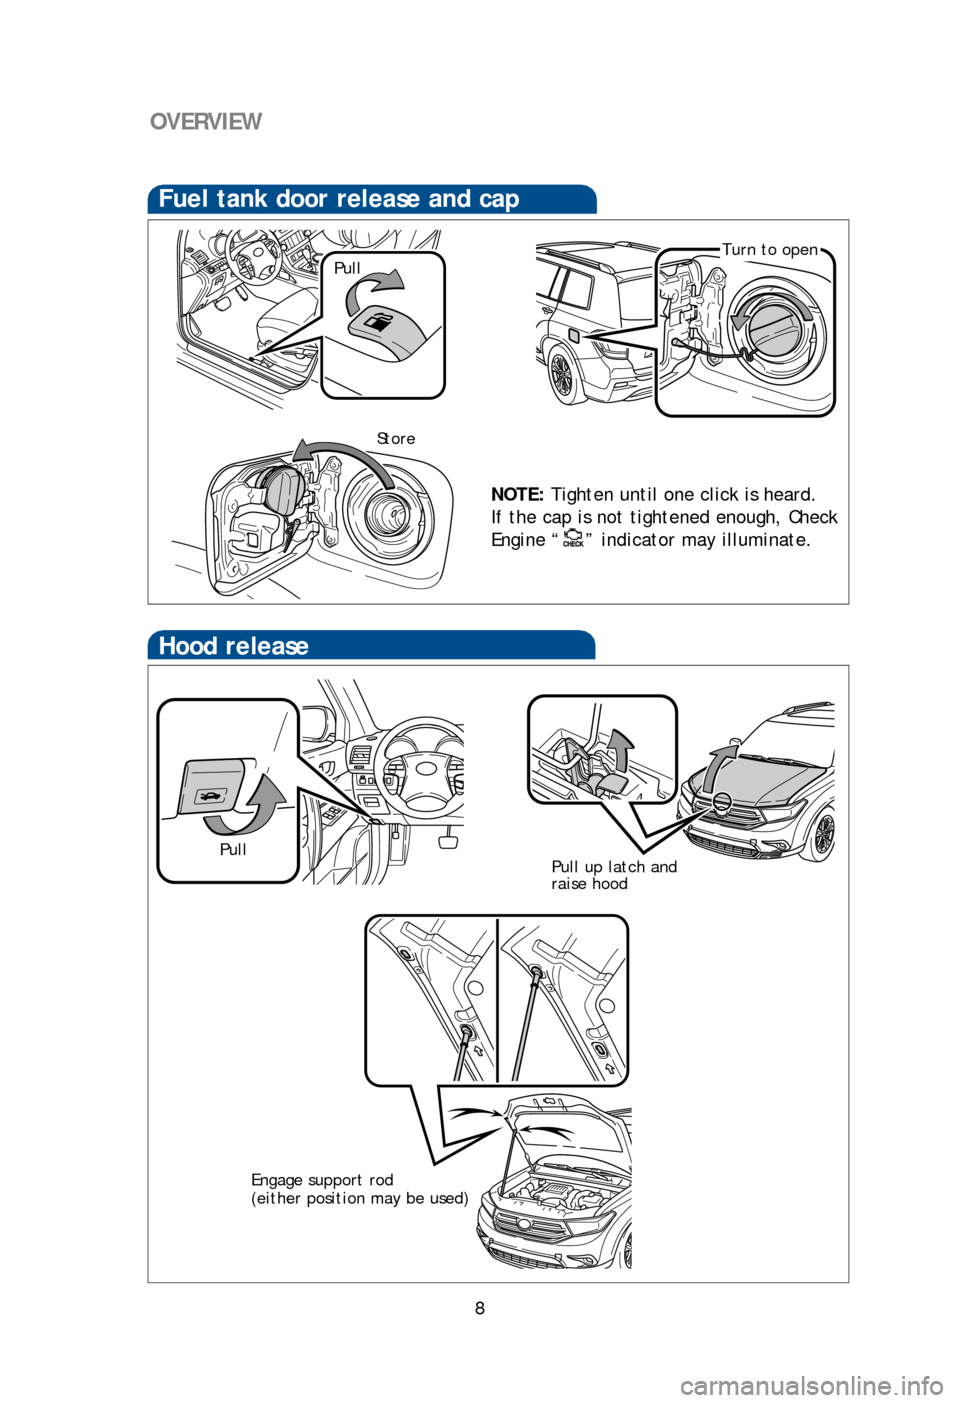 TOYOTA HIGHLANDER 2013 XU50 / 3.G Quick Reference Guide 8
Hood release
Pull up latch and 
raise hood
Fuel tank door release and cap
NOTE: Tighten until one click is heard. 
If the cap is not tightened enough, Check 
Engine “
” indicator may illuminate.